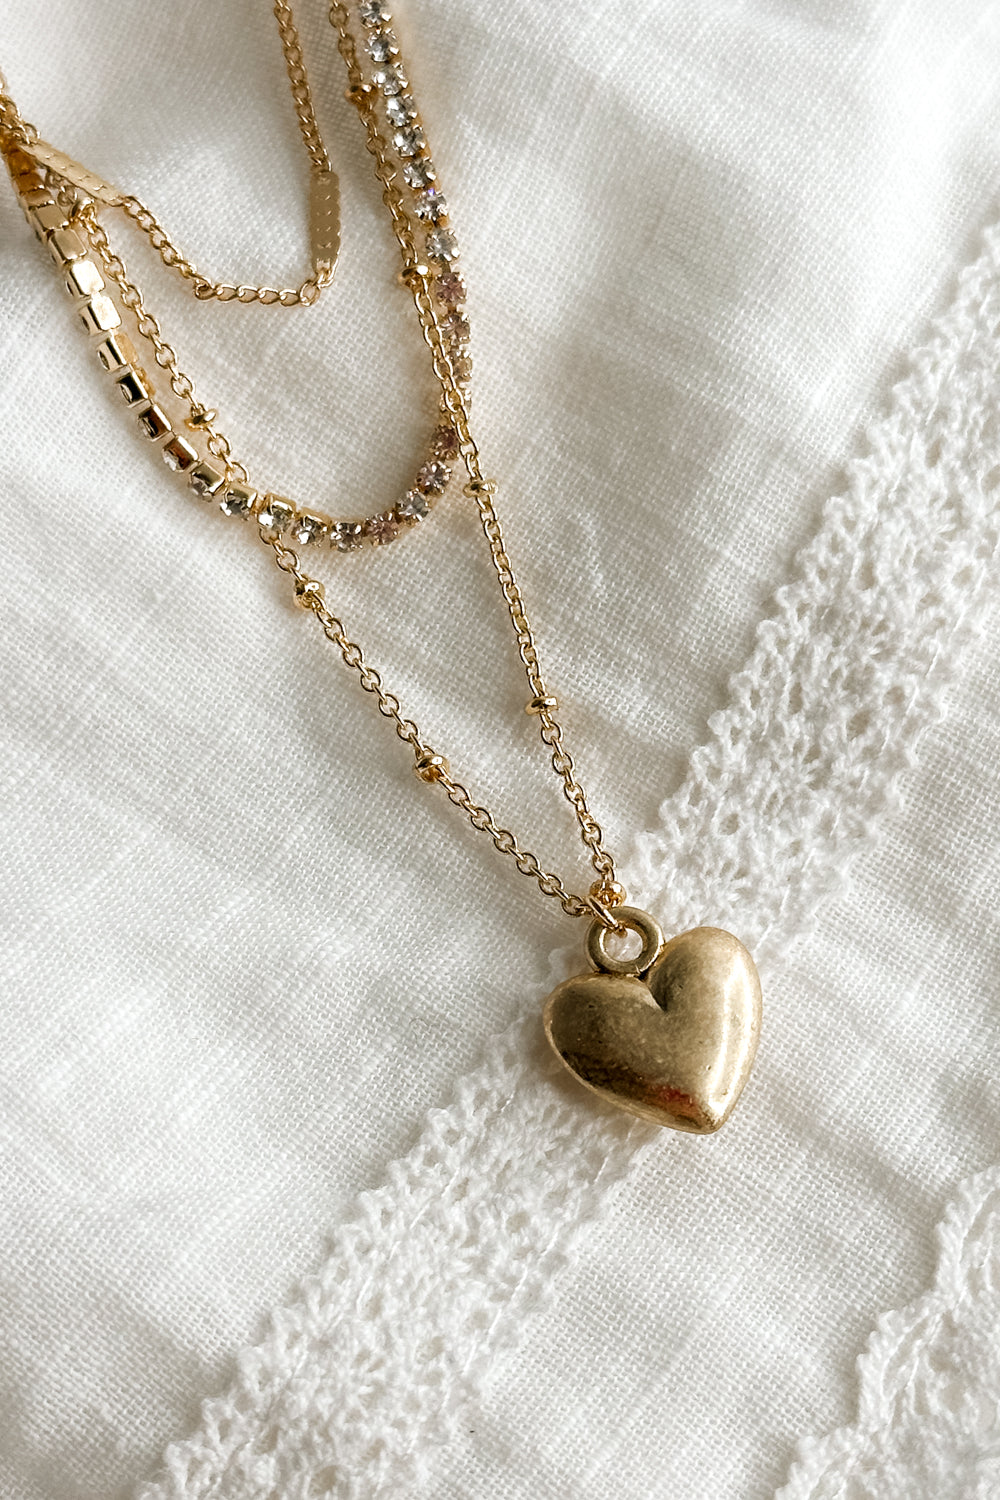 Close up view of the Celeste Gold Triple Layer Chain Heart Necklace which features two gold chain link layers, rhinestone layer, gold heart medallion and set in golds